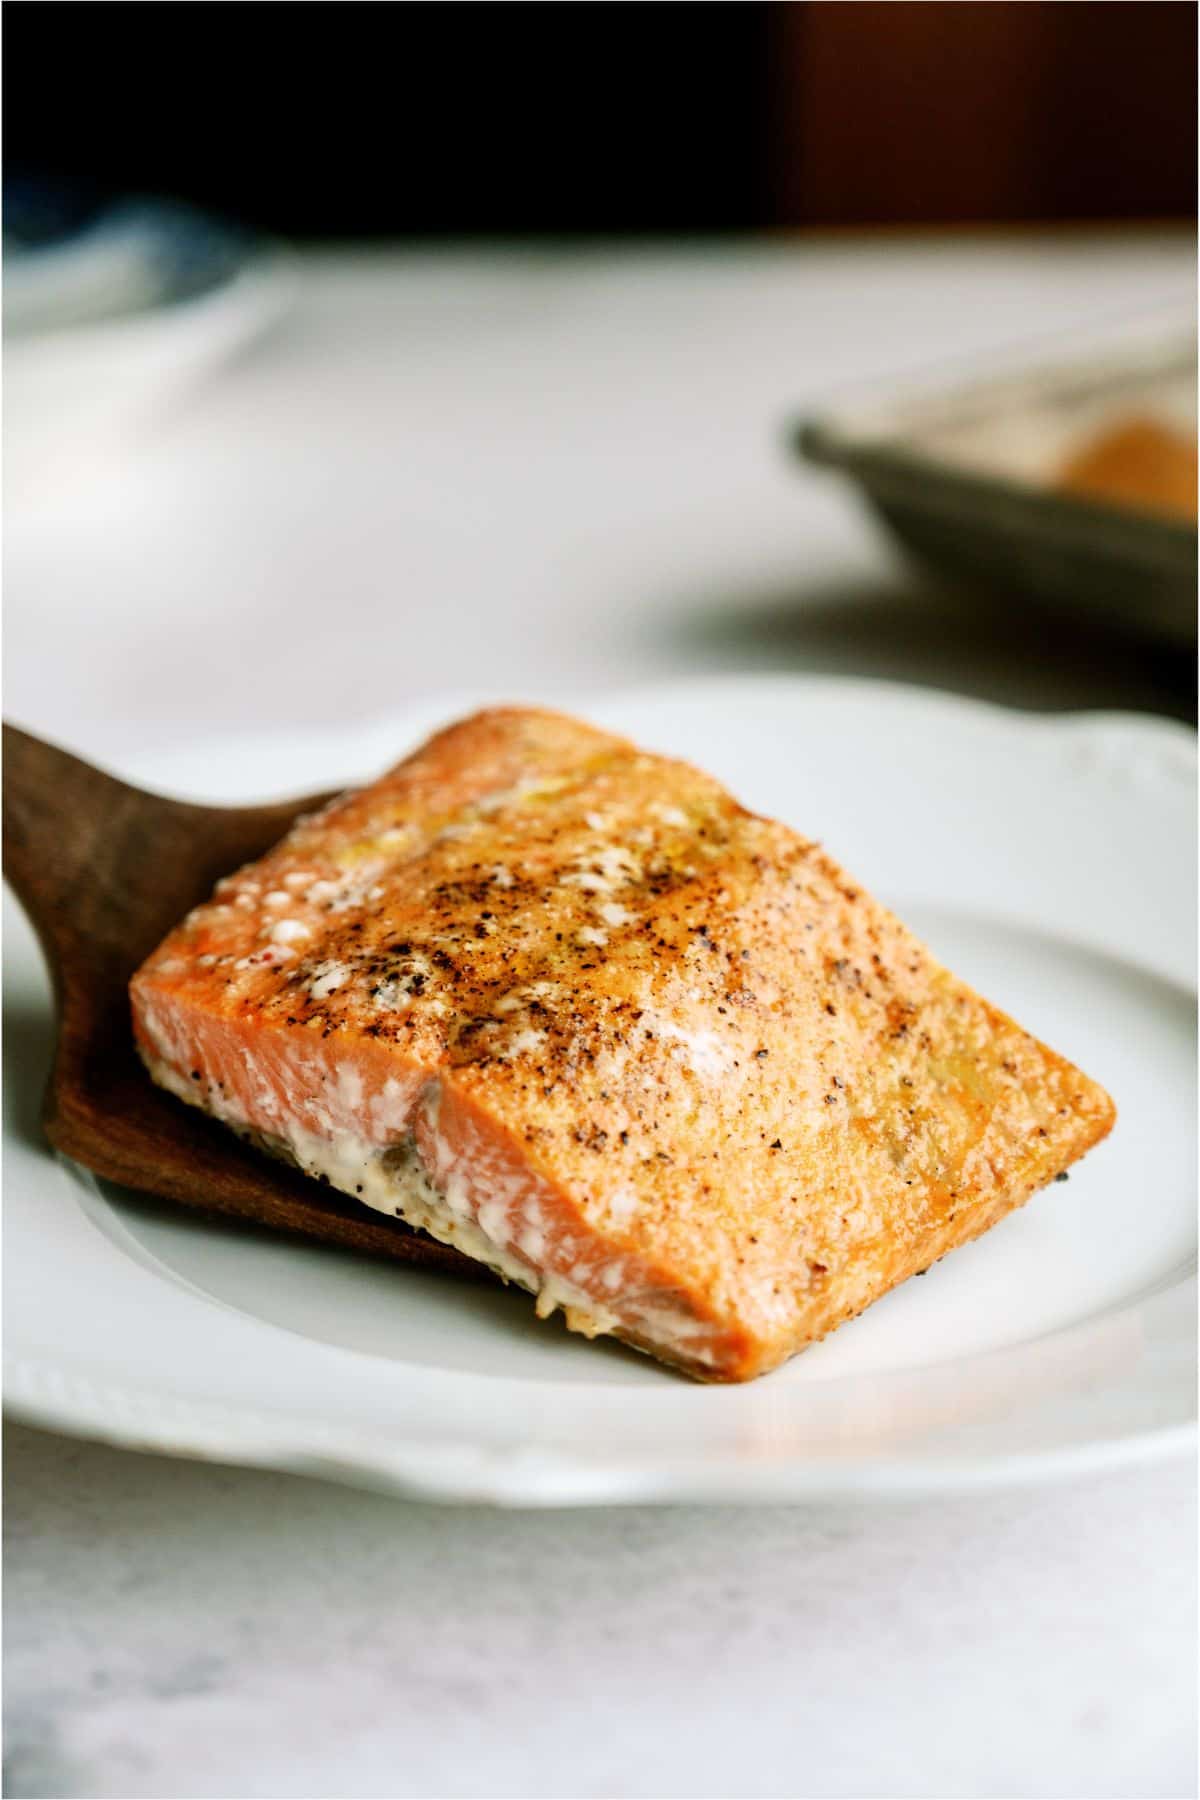 Baked Salmon filet being placed on a plate